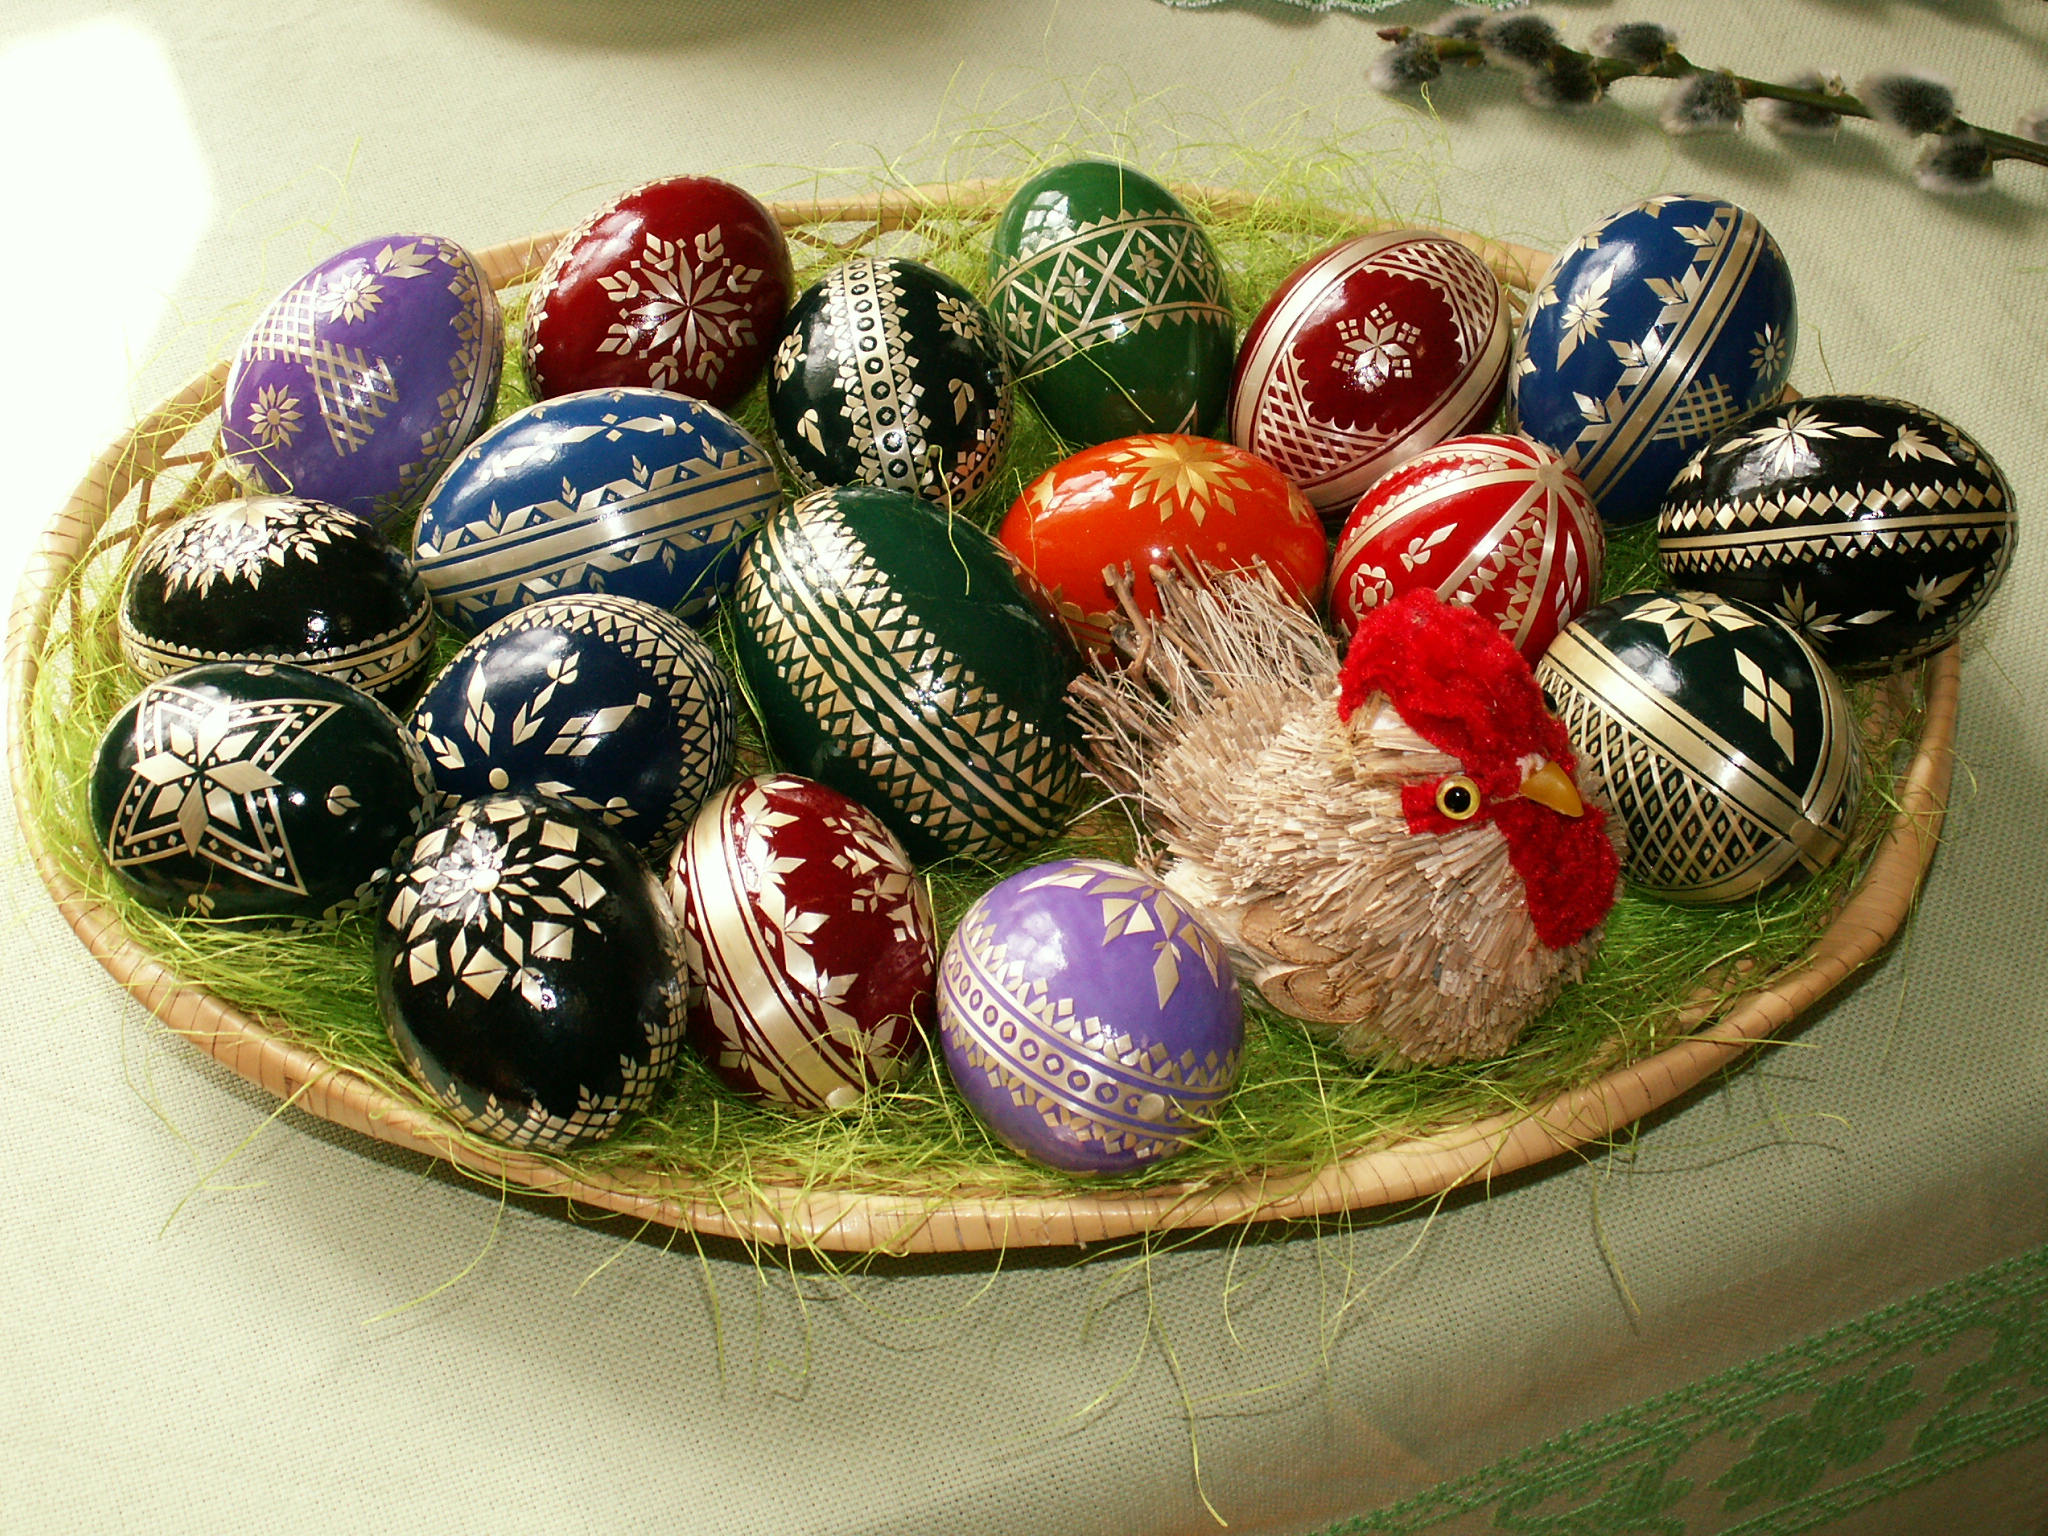 File:Easter eggs - straw decoration.jpg - Wikimedia Commons